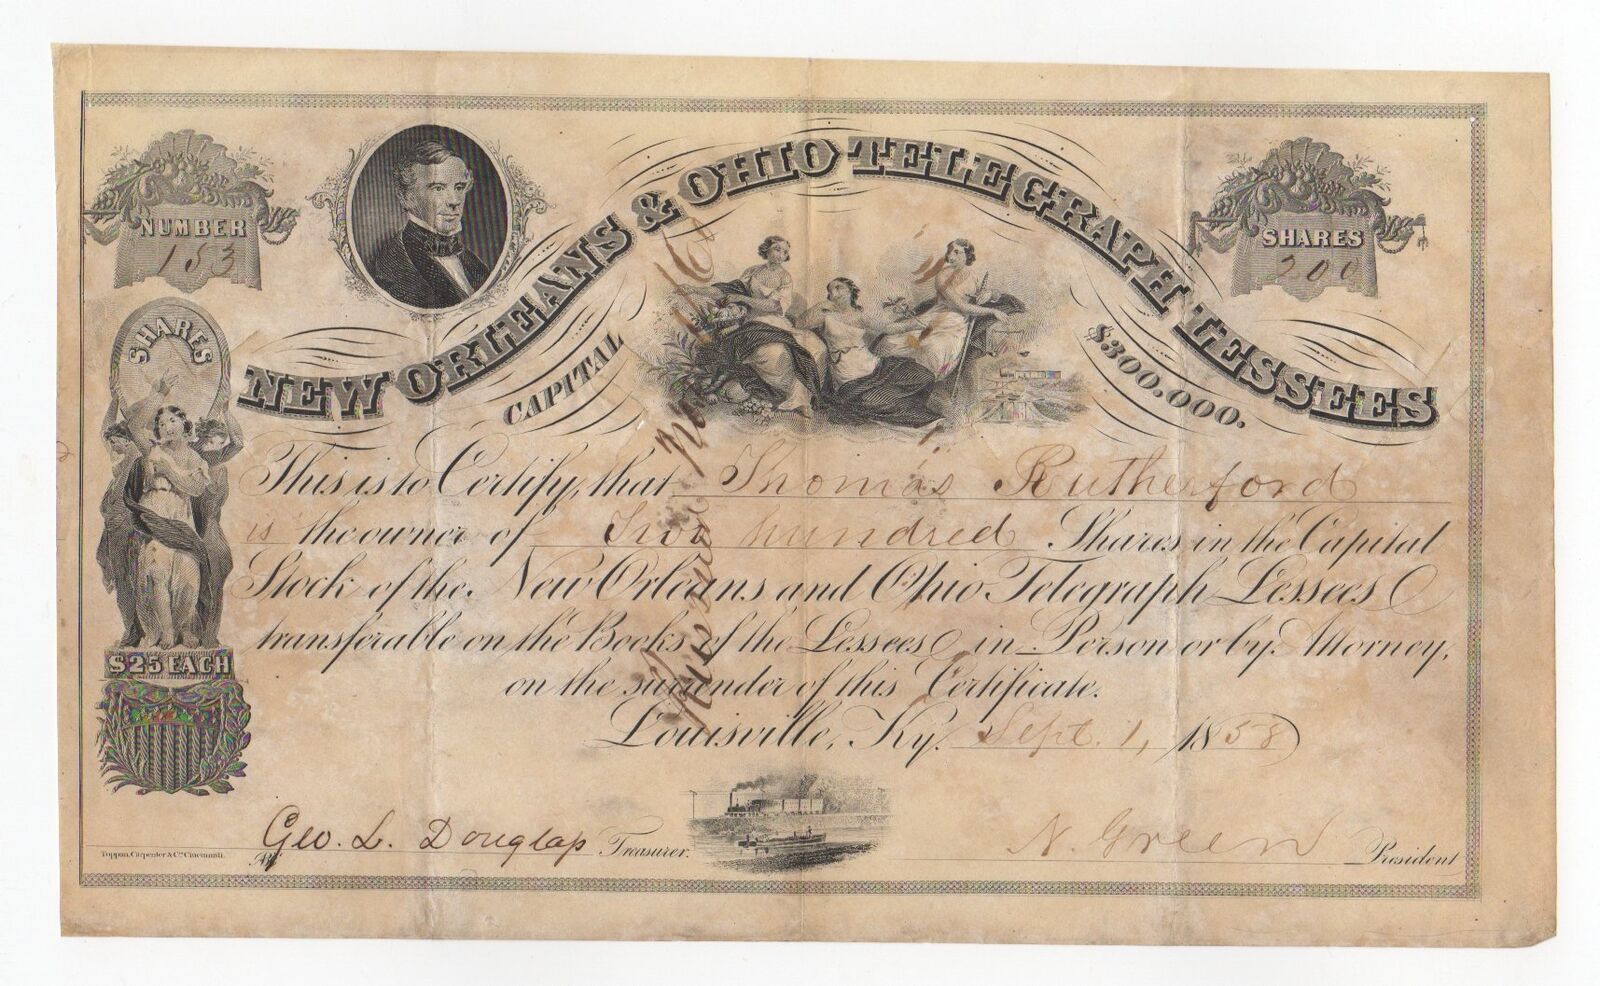 1858 New Orleans & Ohio Telegraph Lessees Stock Certificate - Norvin Green